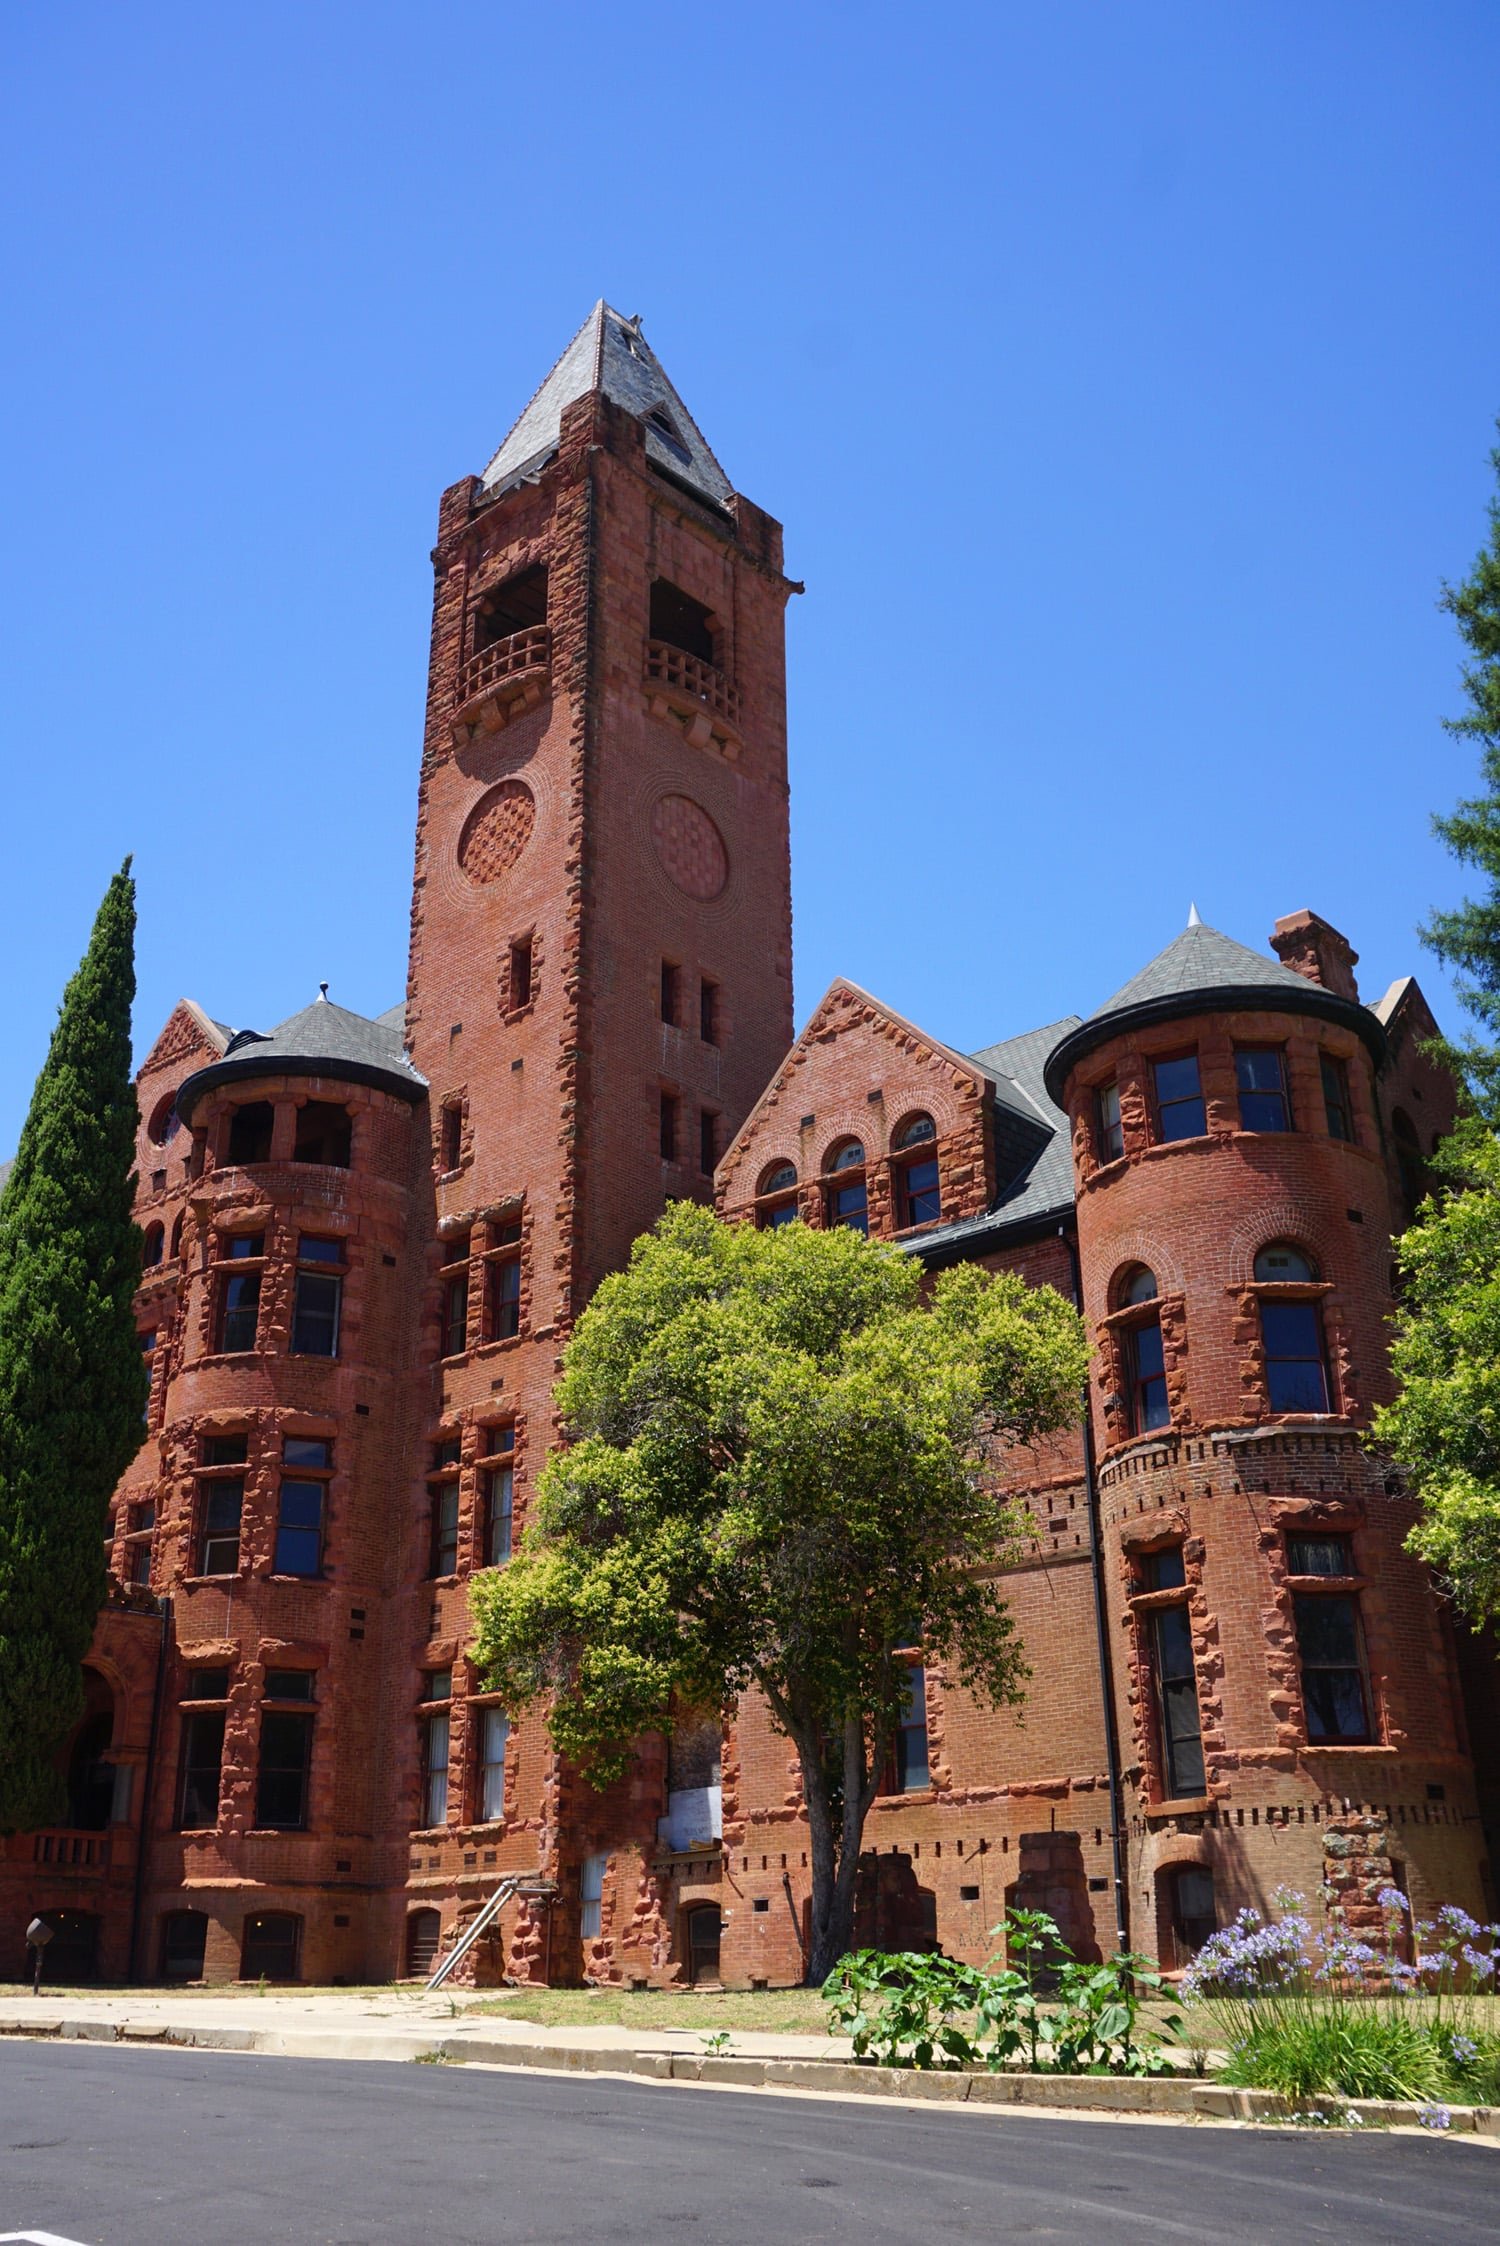 Preston Castle - large red brick building with plants and trees out front